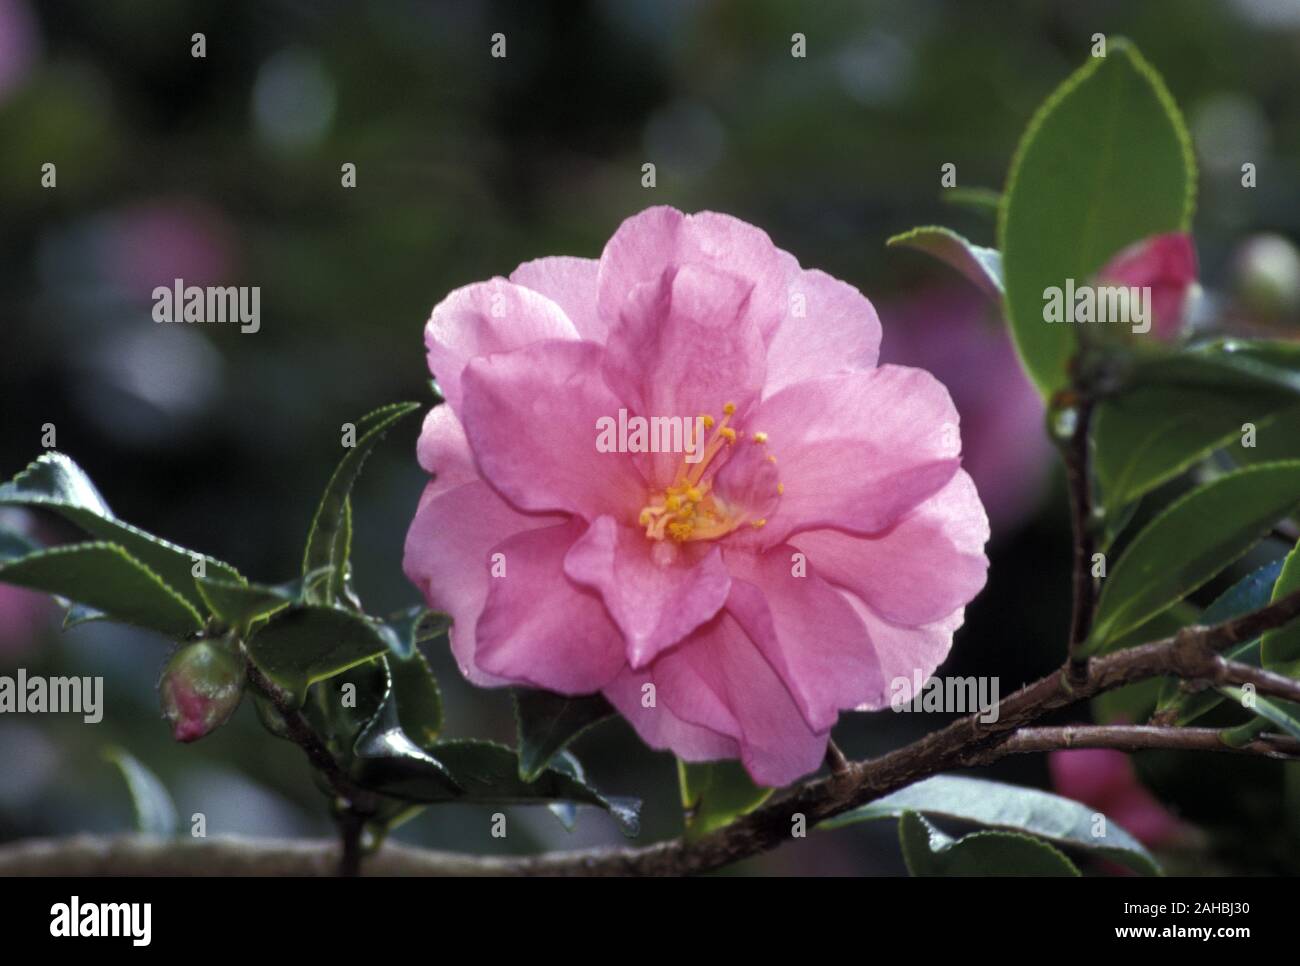 CLOSE-UP OF A PINK CAMELLIA FLOWER. CAMELLIA SHRUBS/TREES ARE EVERGREENS AND USUALLY GROW AT A RAPID RATE. Stock Photo